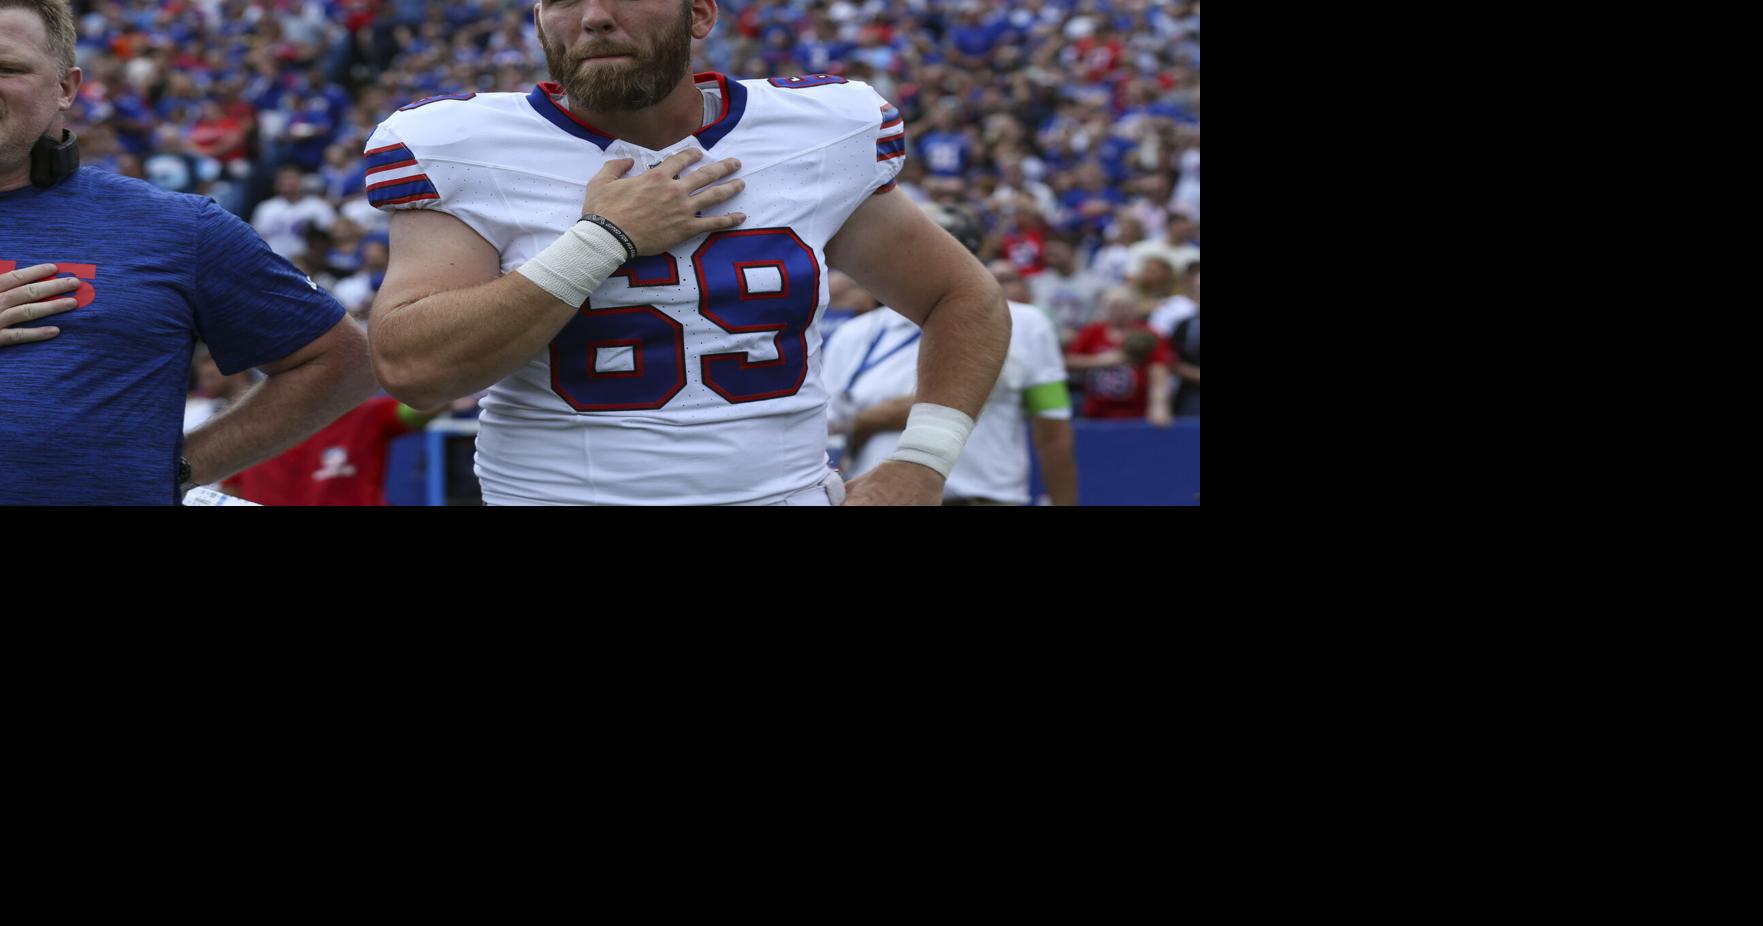 Buffalo Bills Player Switches Jersey Number to 0